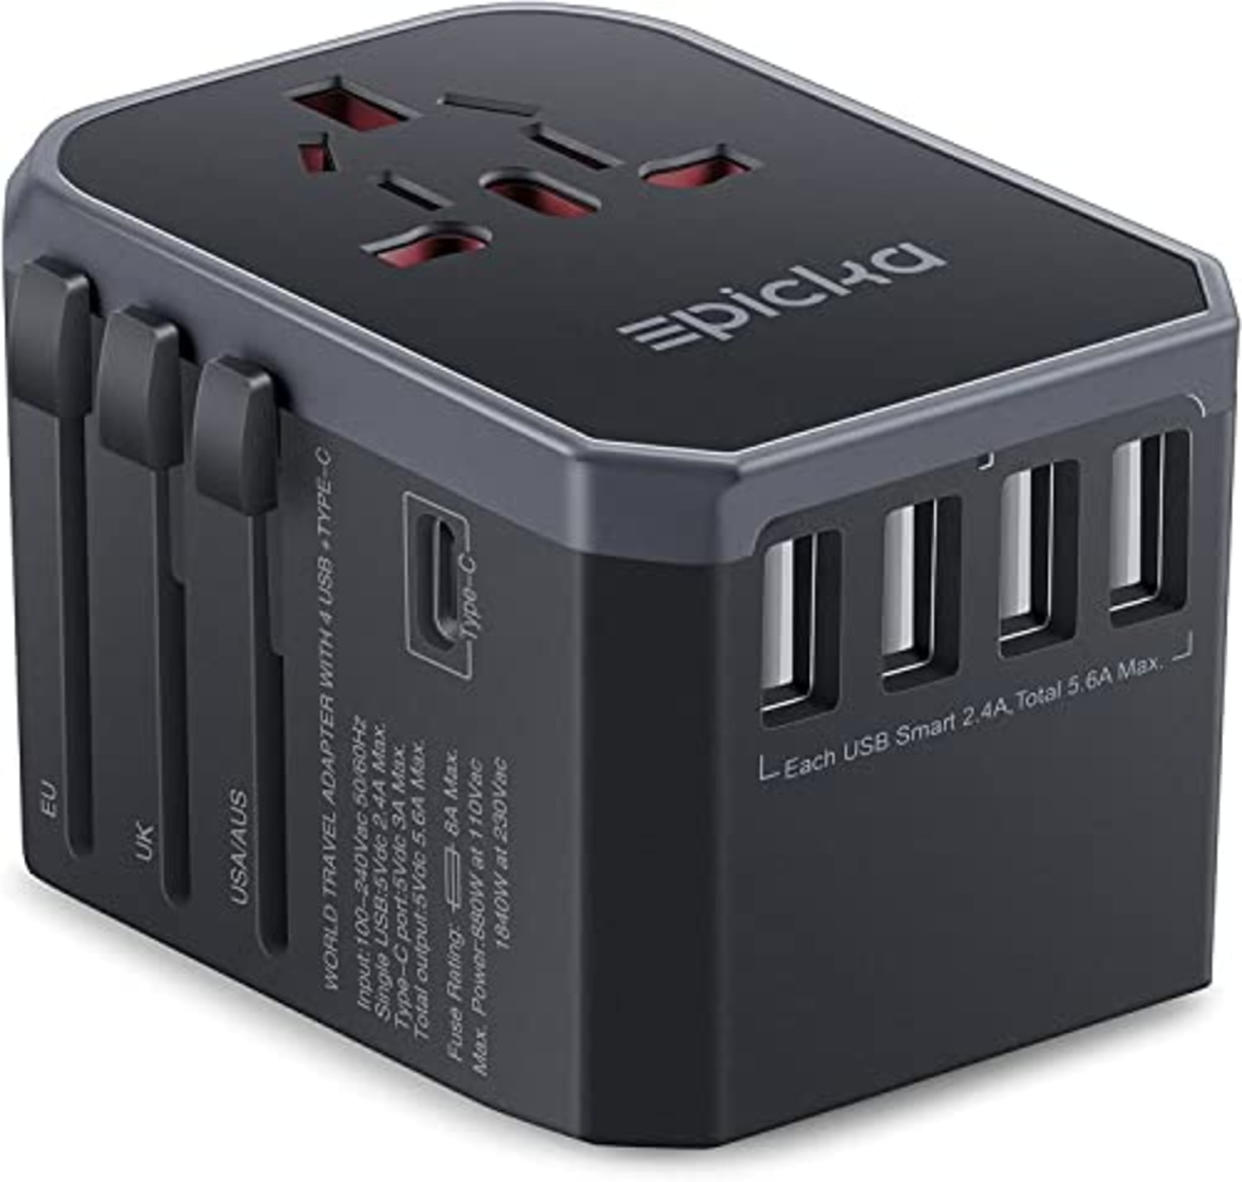 EPICKA Universal Travel Adapter One International Wall Charger AC Plug Adaptor with 5.6A Smart Power and 3.0A USB Type-C for USA EU UK AUS (TA-105, Grey) (AMAZON)